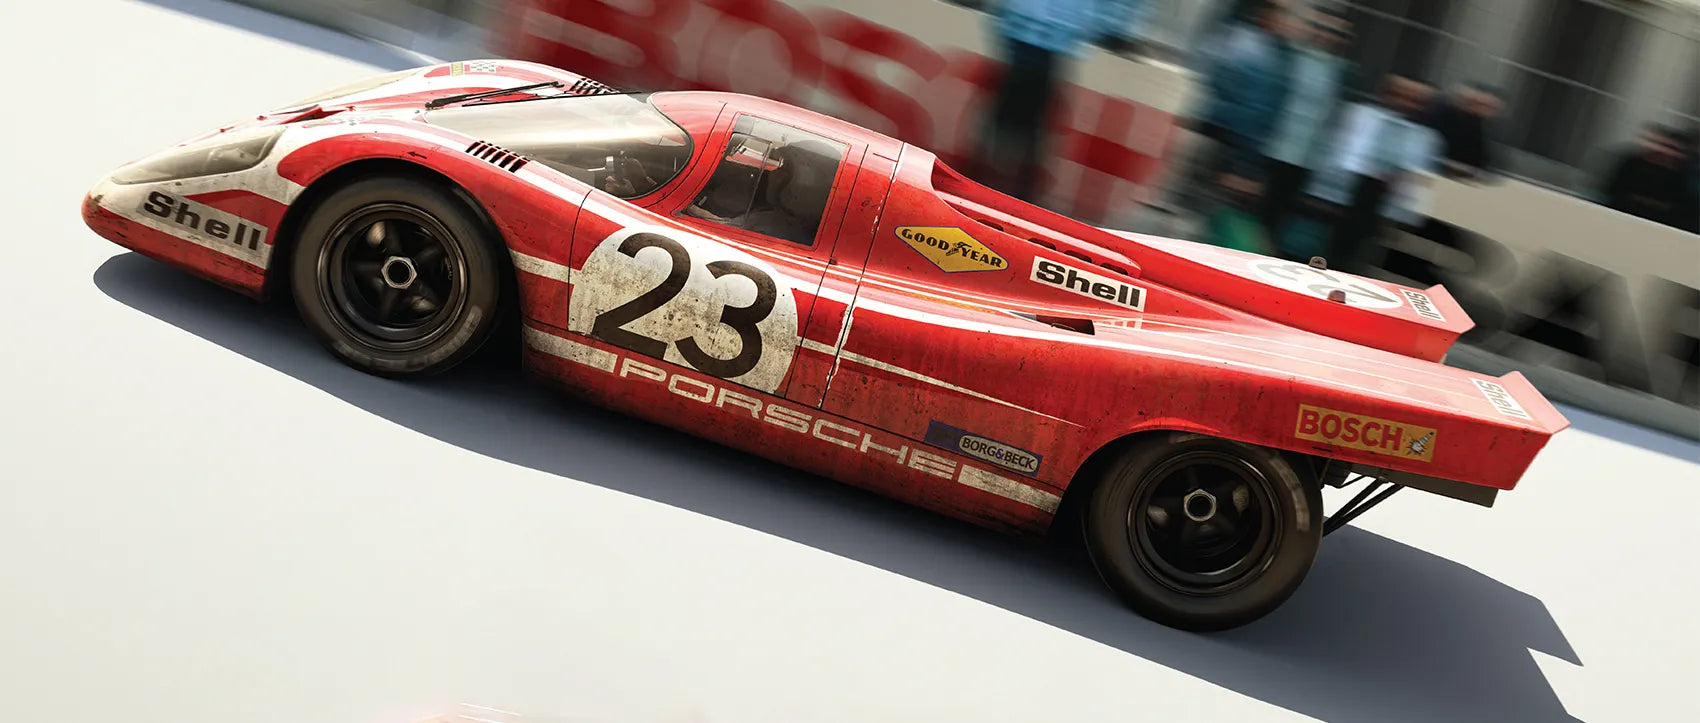 Porsche 917 KH: Enduring Legend of Past and Future